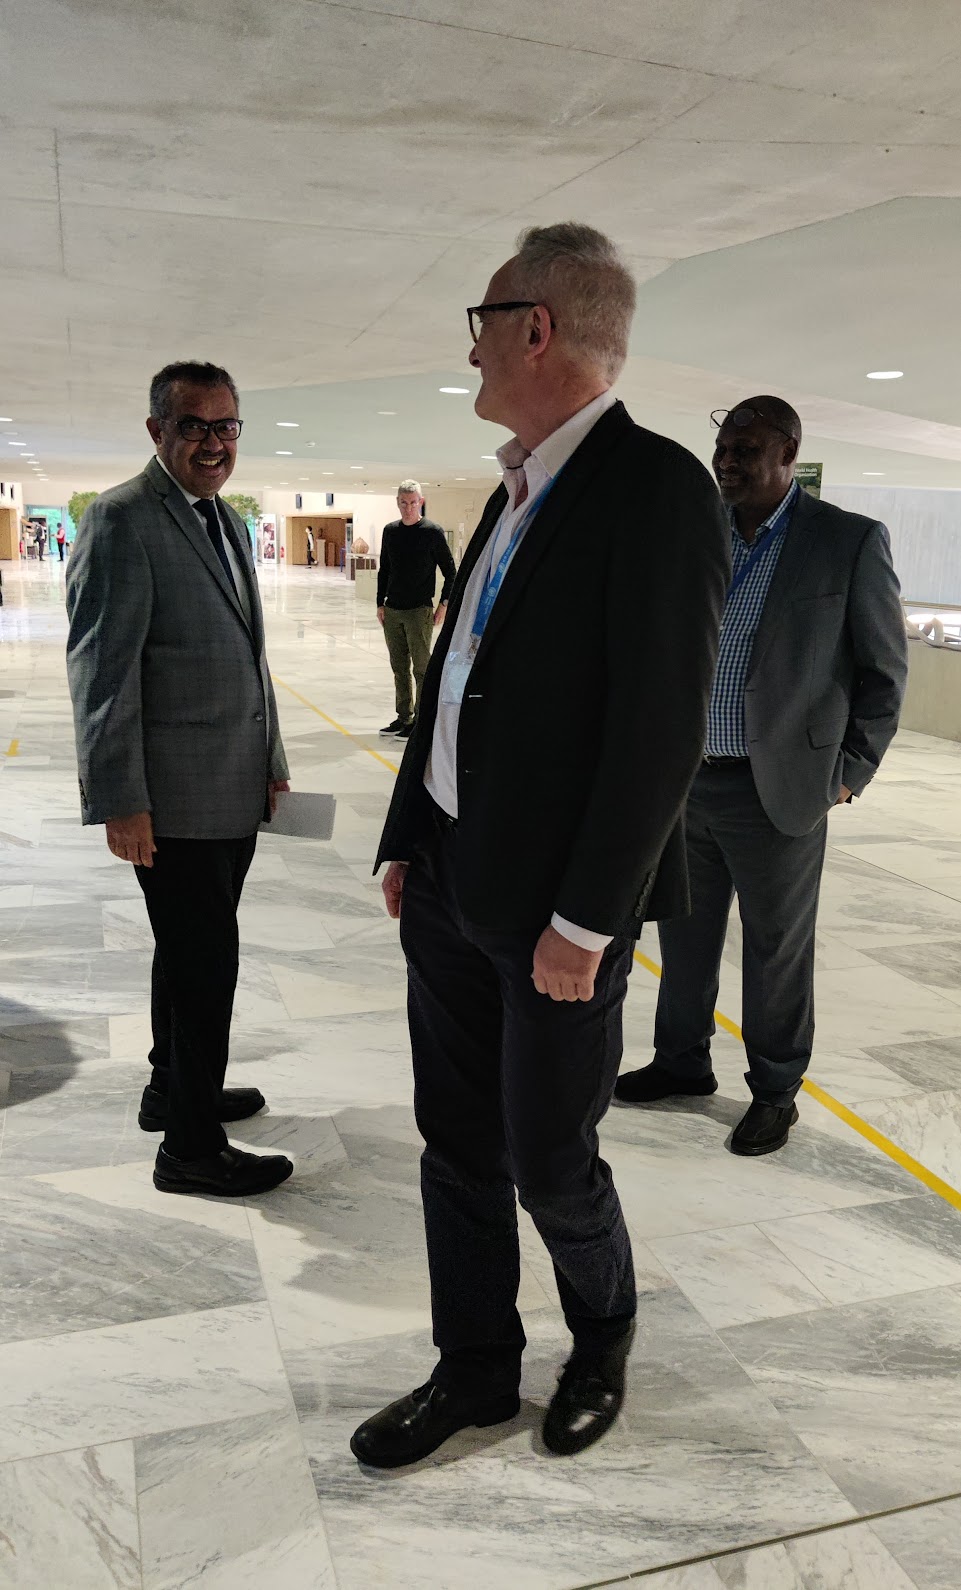 Dr. Tedros and Prof. Squires